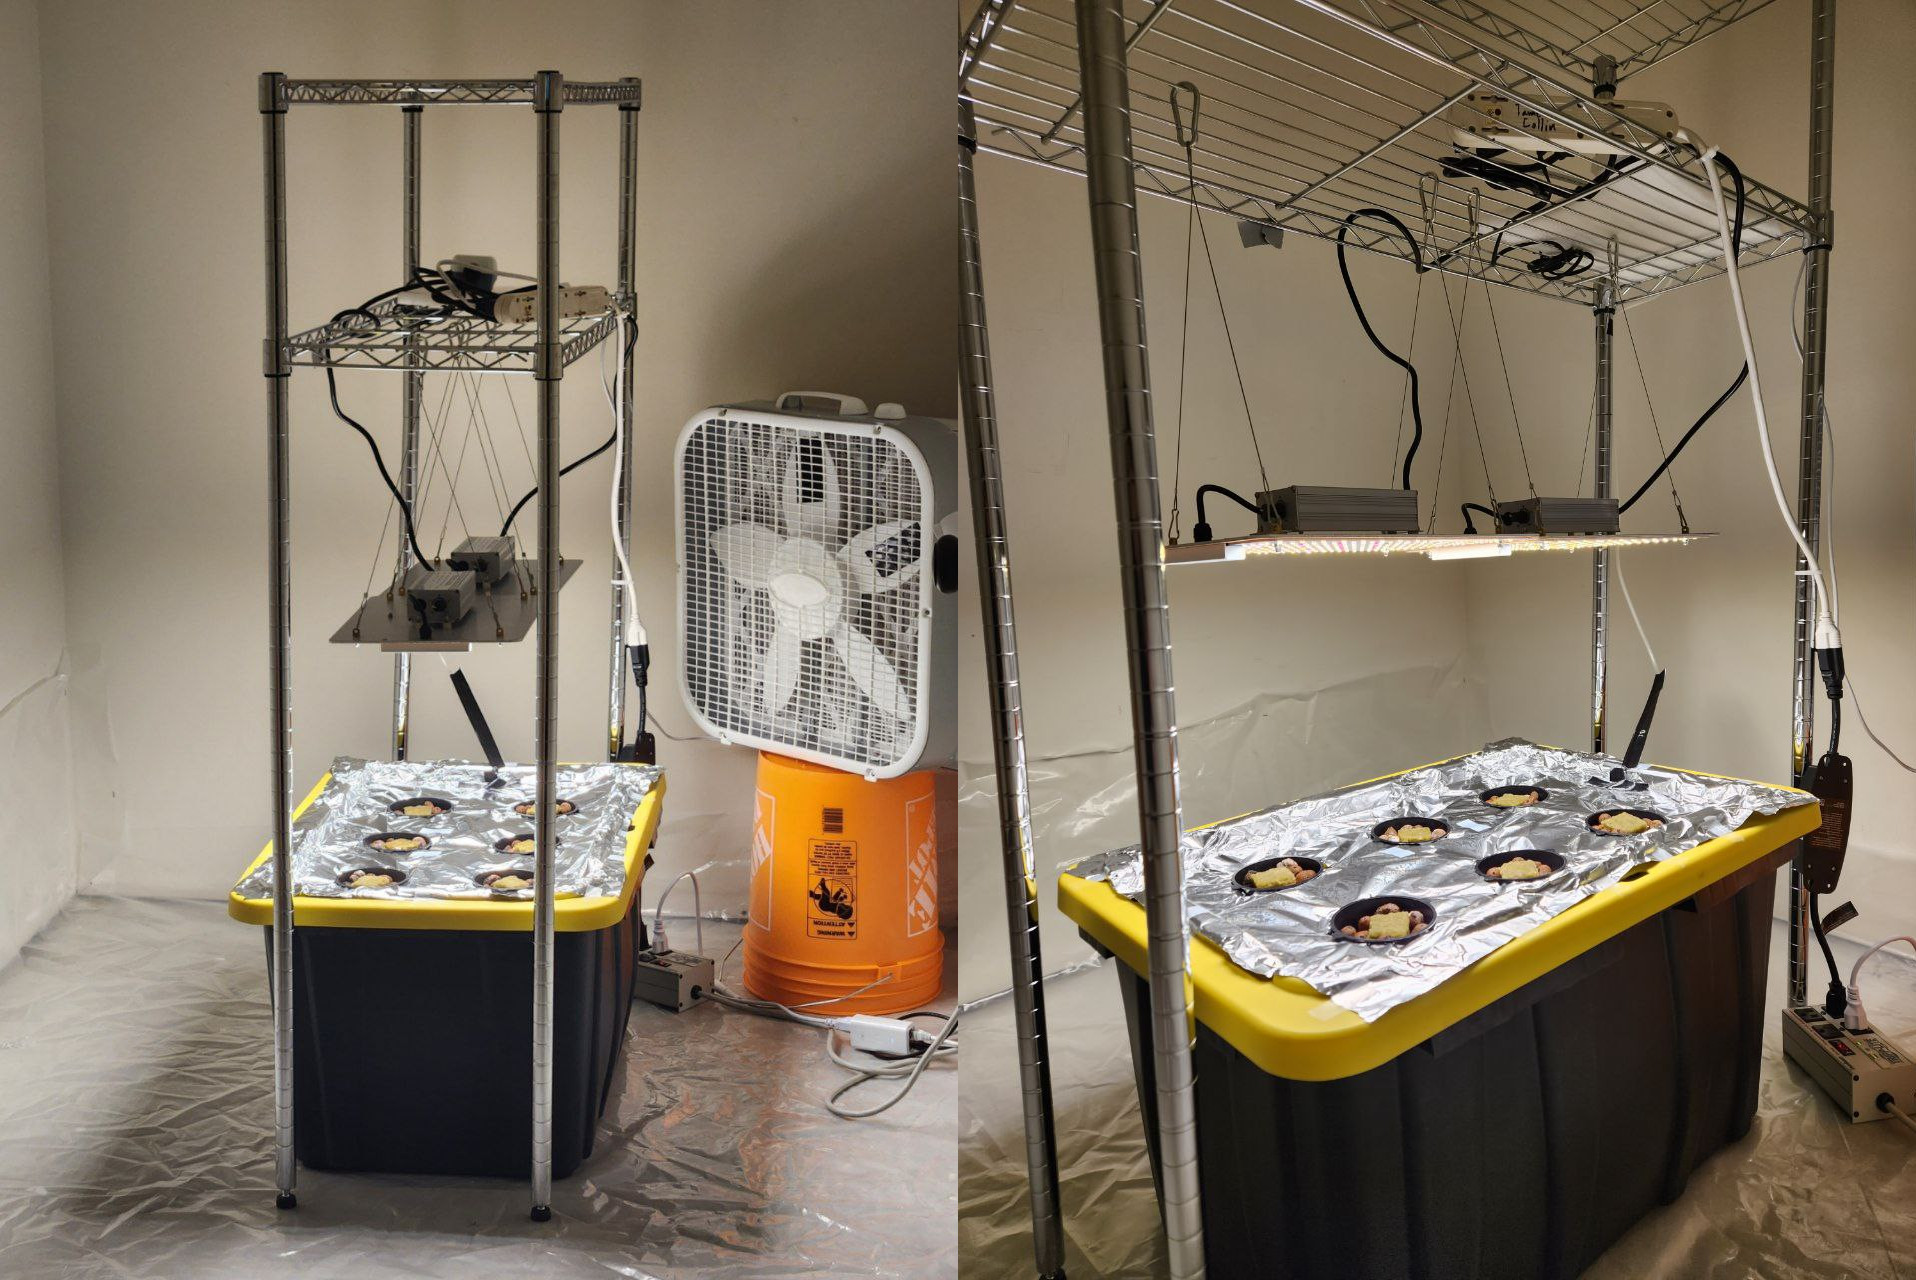 the hydroponics system from two angles. a black tub with yellow lid, covered in tin foil with six holes for plants. grow lights above suspended by metal shelving.